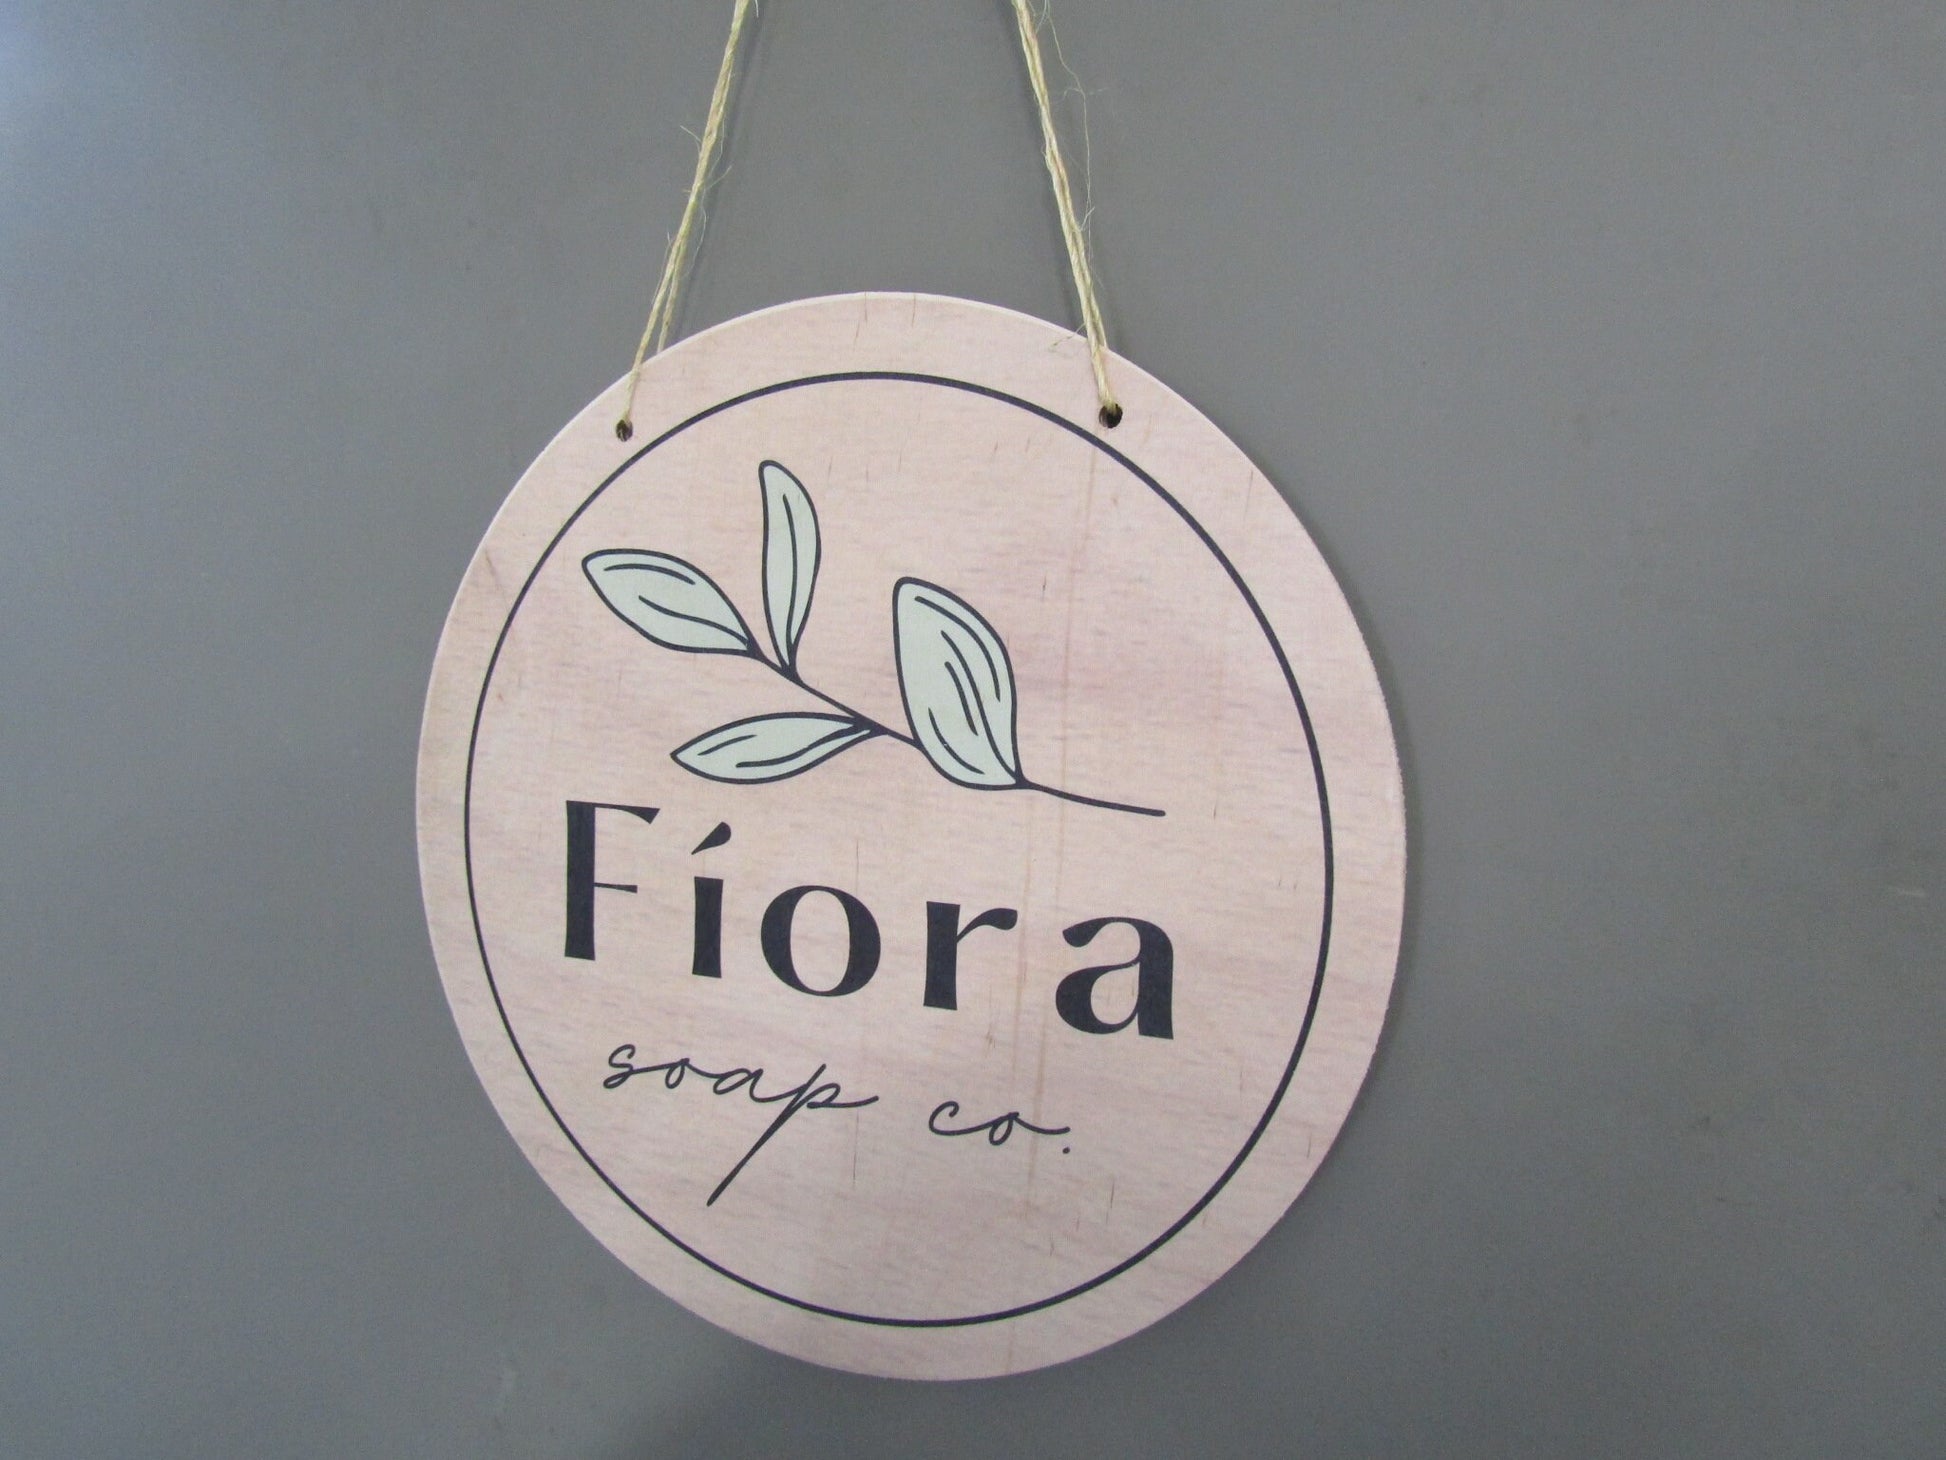 Soap Co. Fiora Greenery Booth Vendor Sign Small Business Company Commerical Signage Your Logo Image Printed on Wood Light Weight Handmade